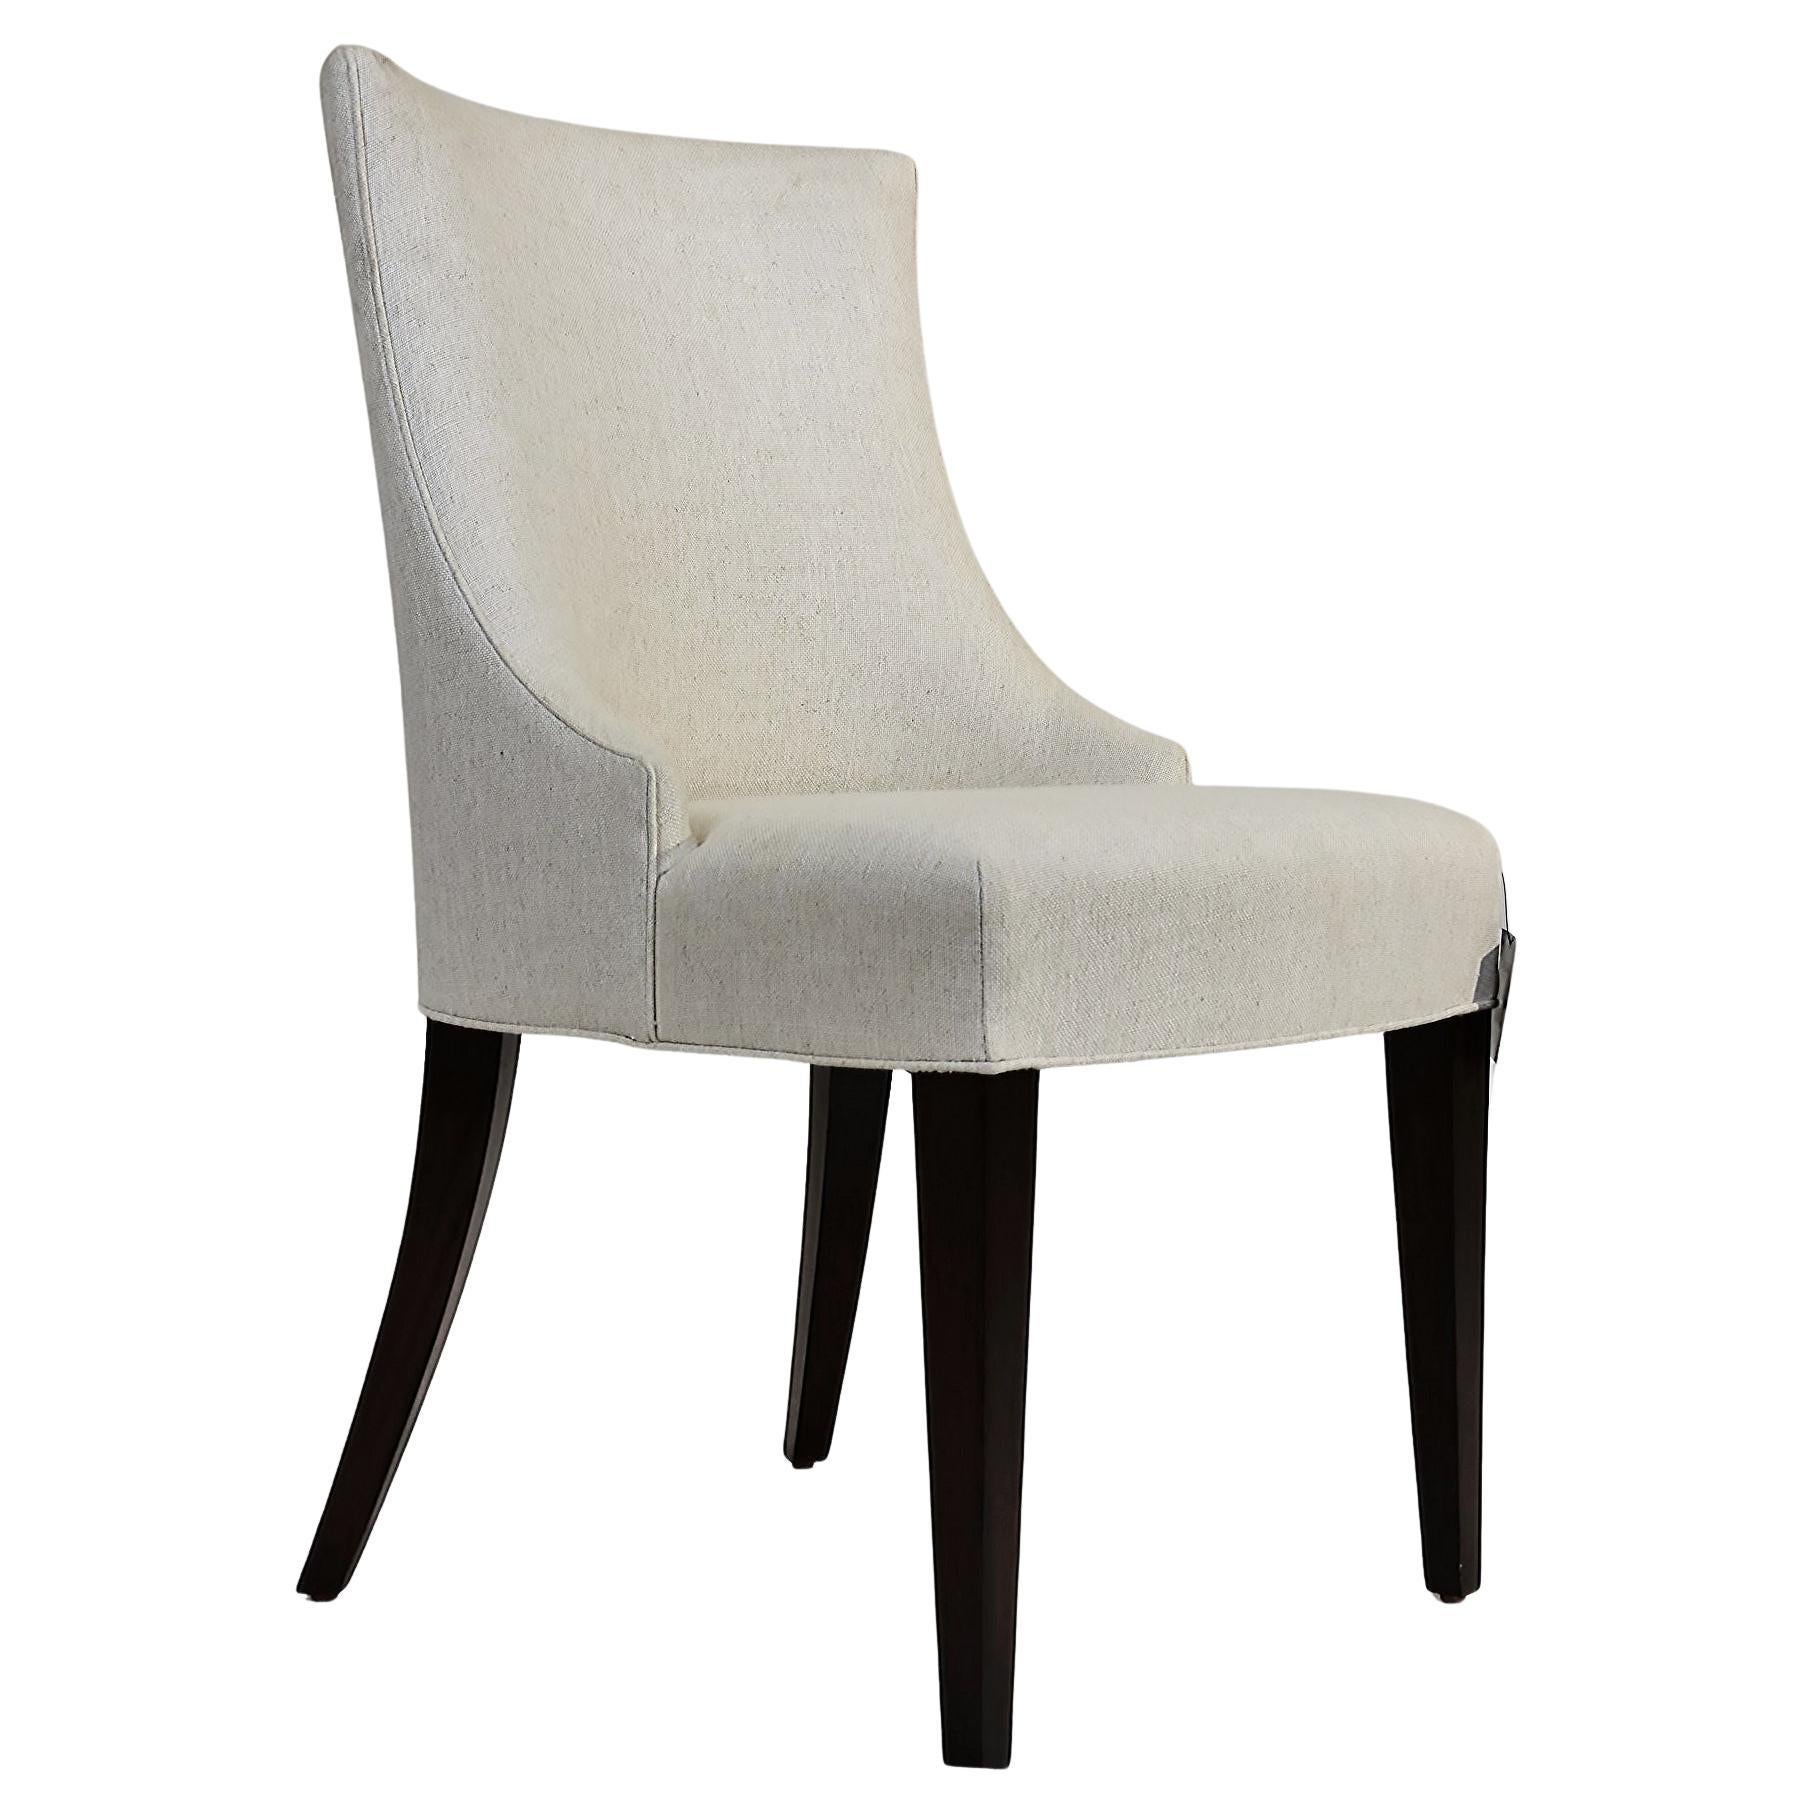 Le Jeune Upholstery "Emily Dining Chair" Showroom Model